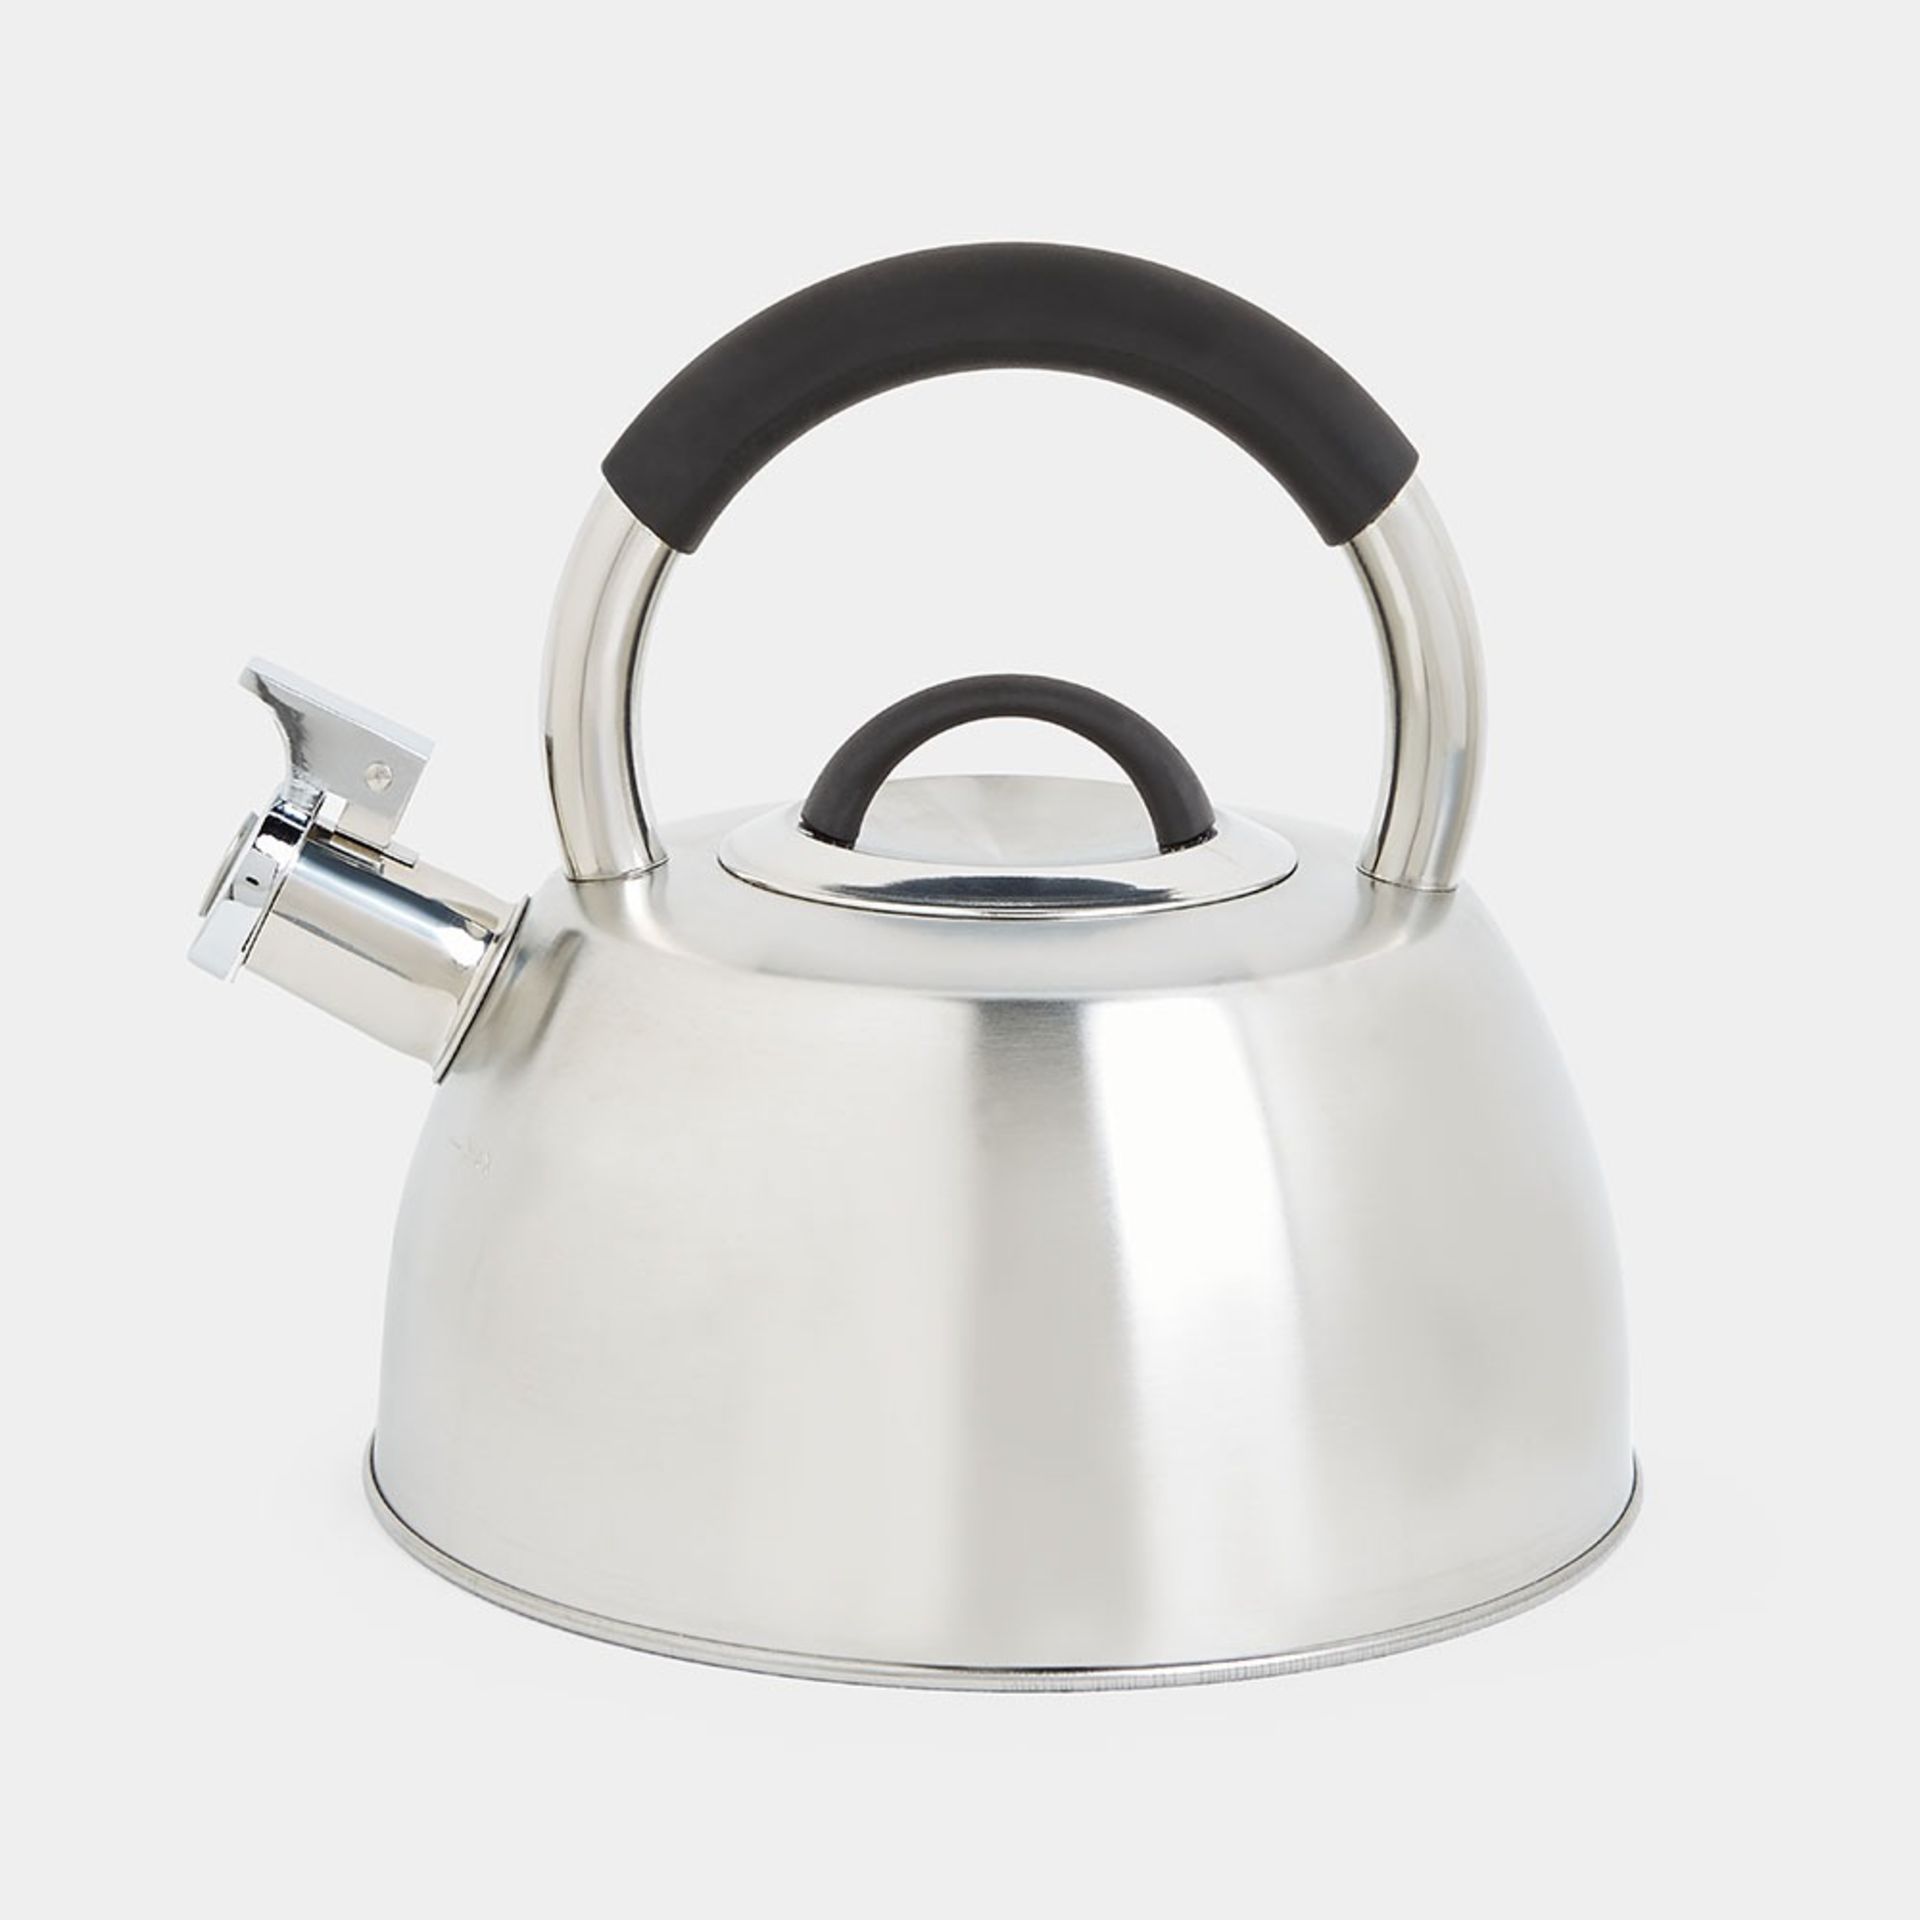 Silver Stainless Steel Whistling Stove Top Kettle - 2.5L - ER38